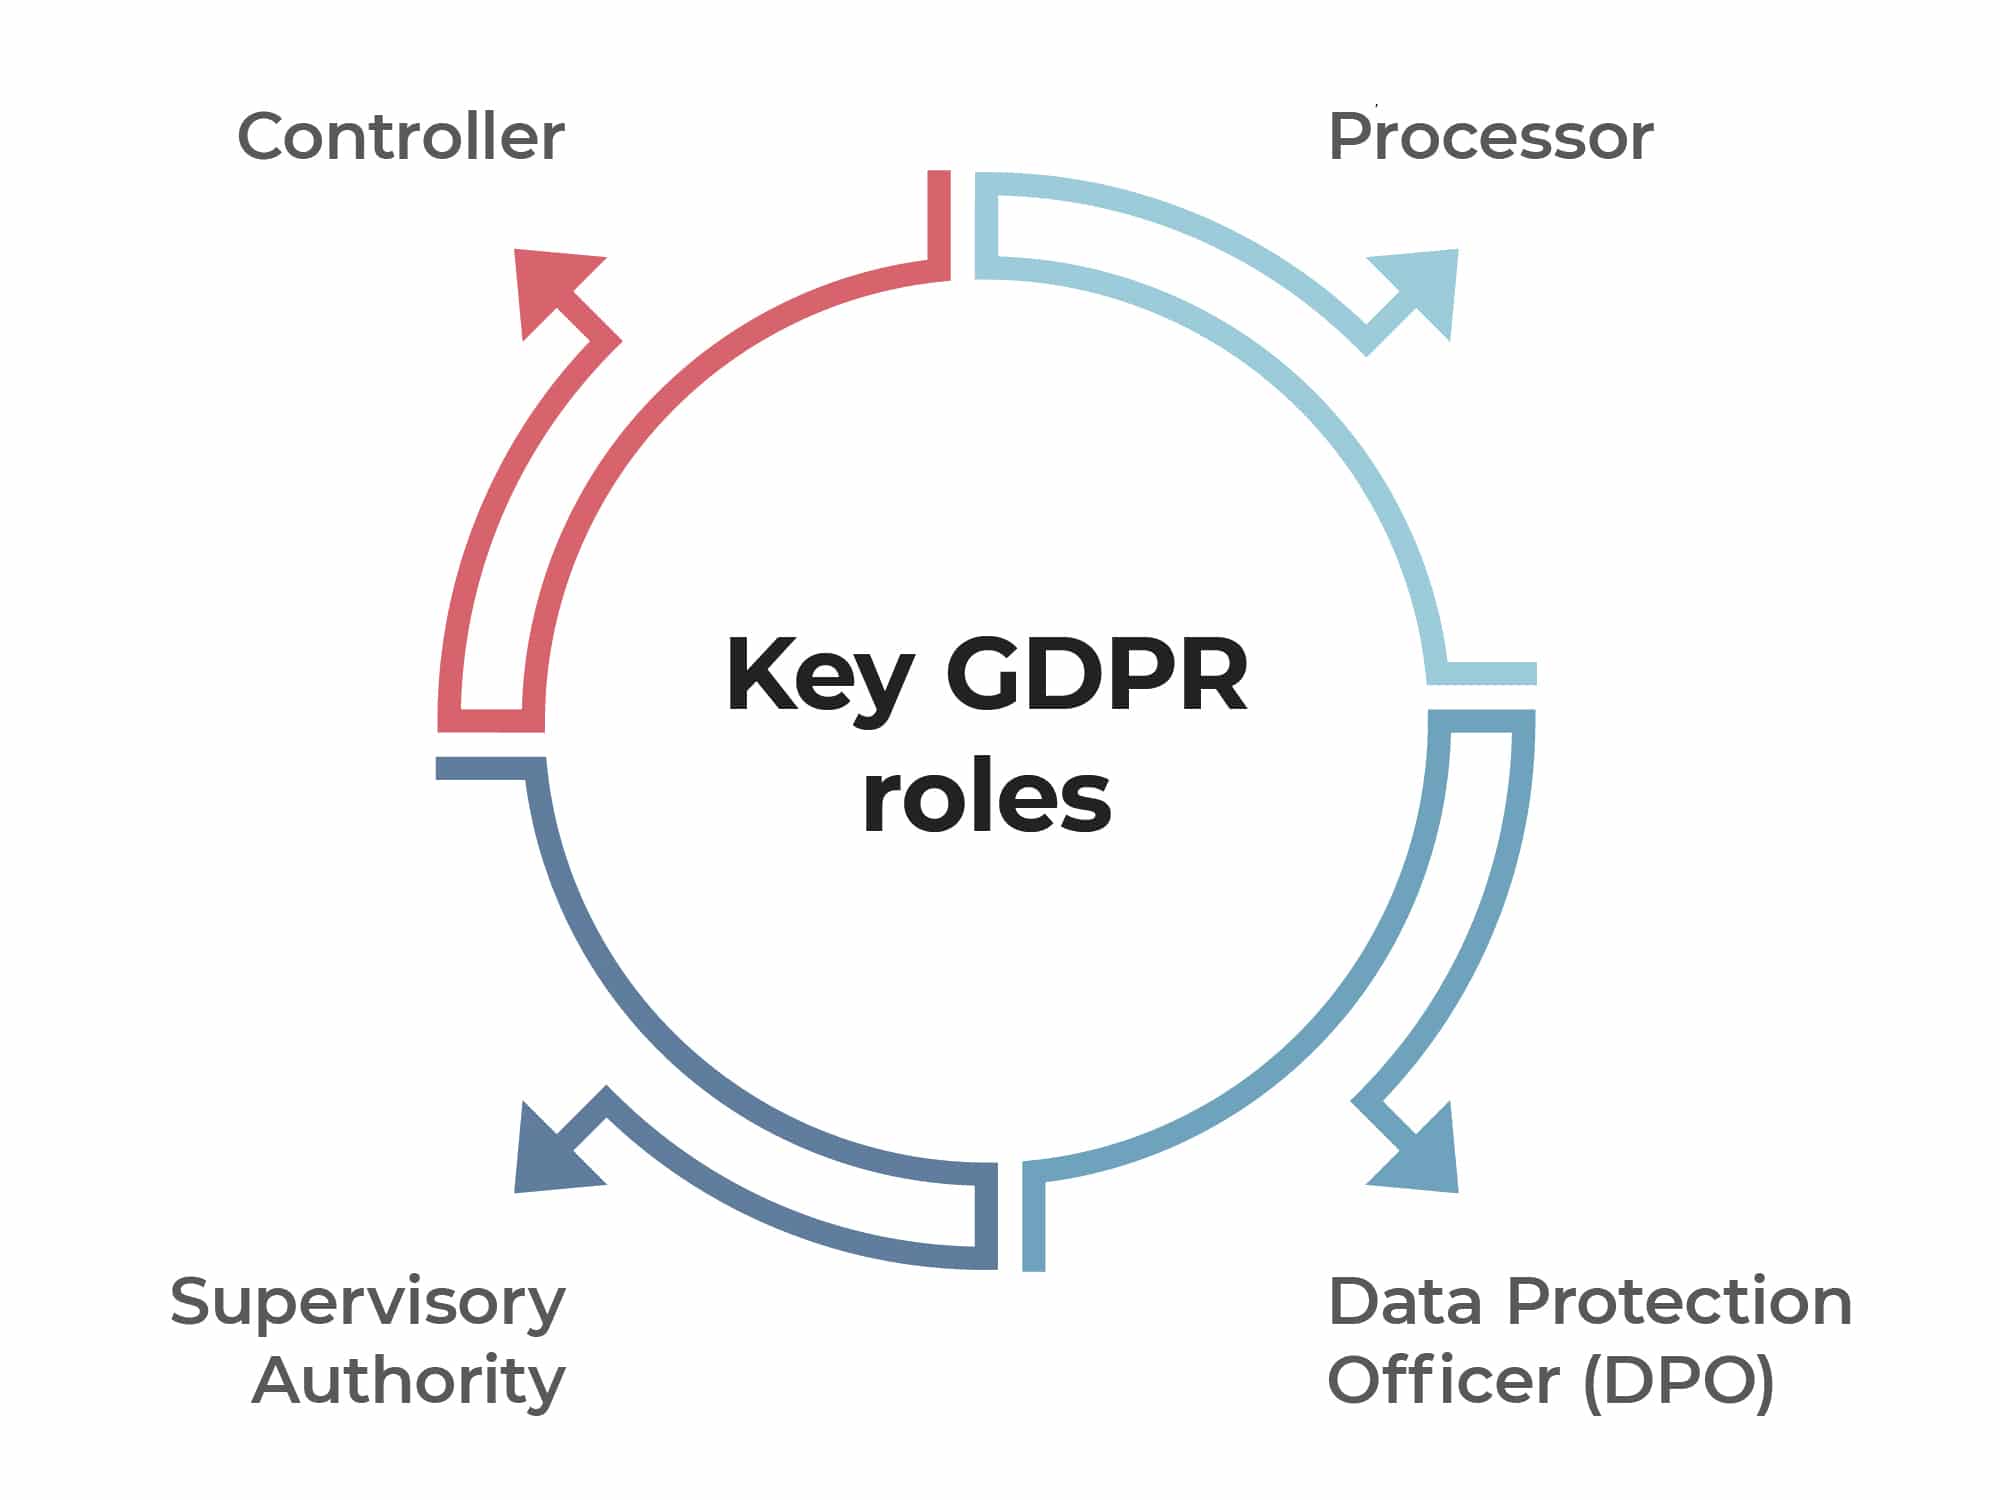 Key GDPR roles and responsibilities